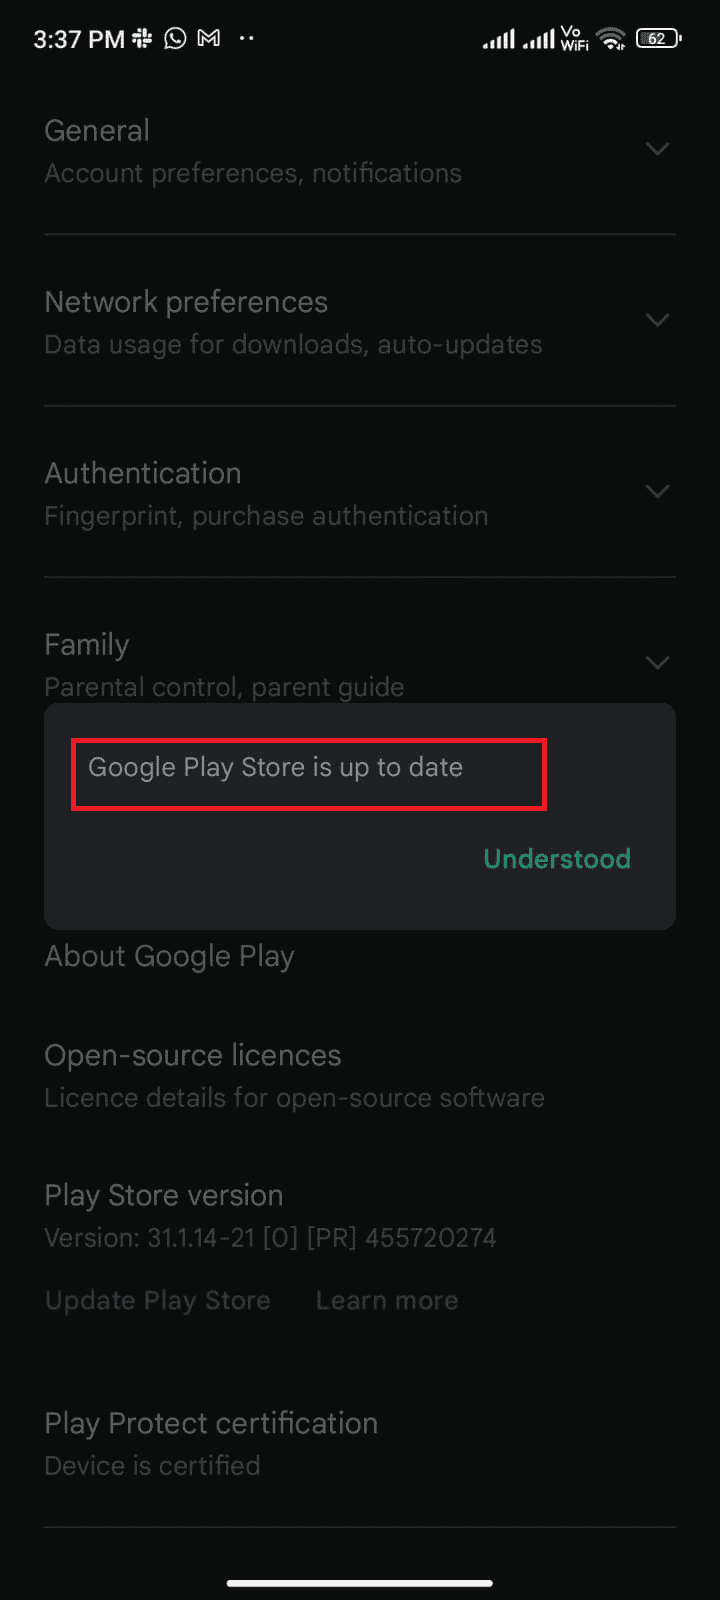 Else, you will be prompted with Google Play Store is up to date. 